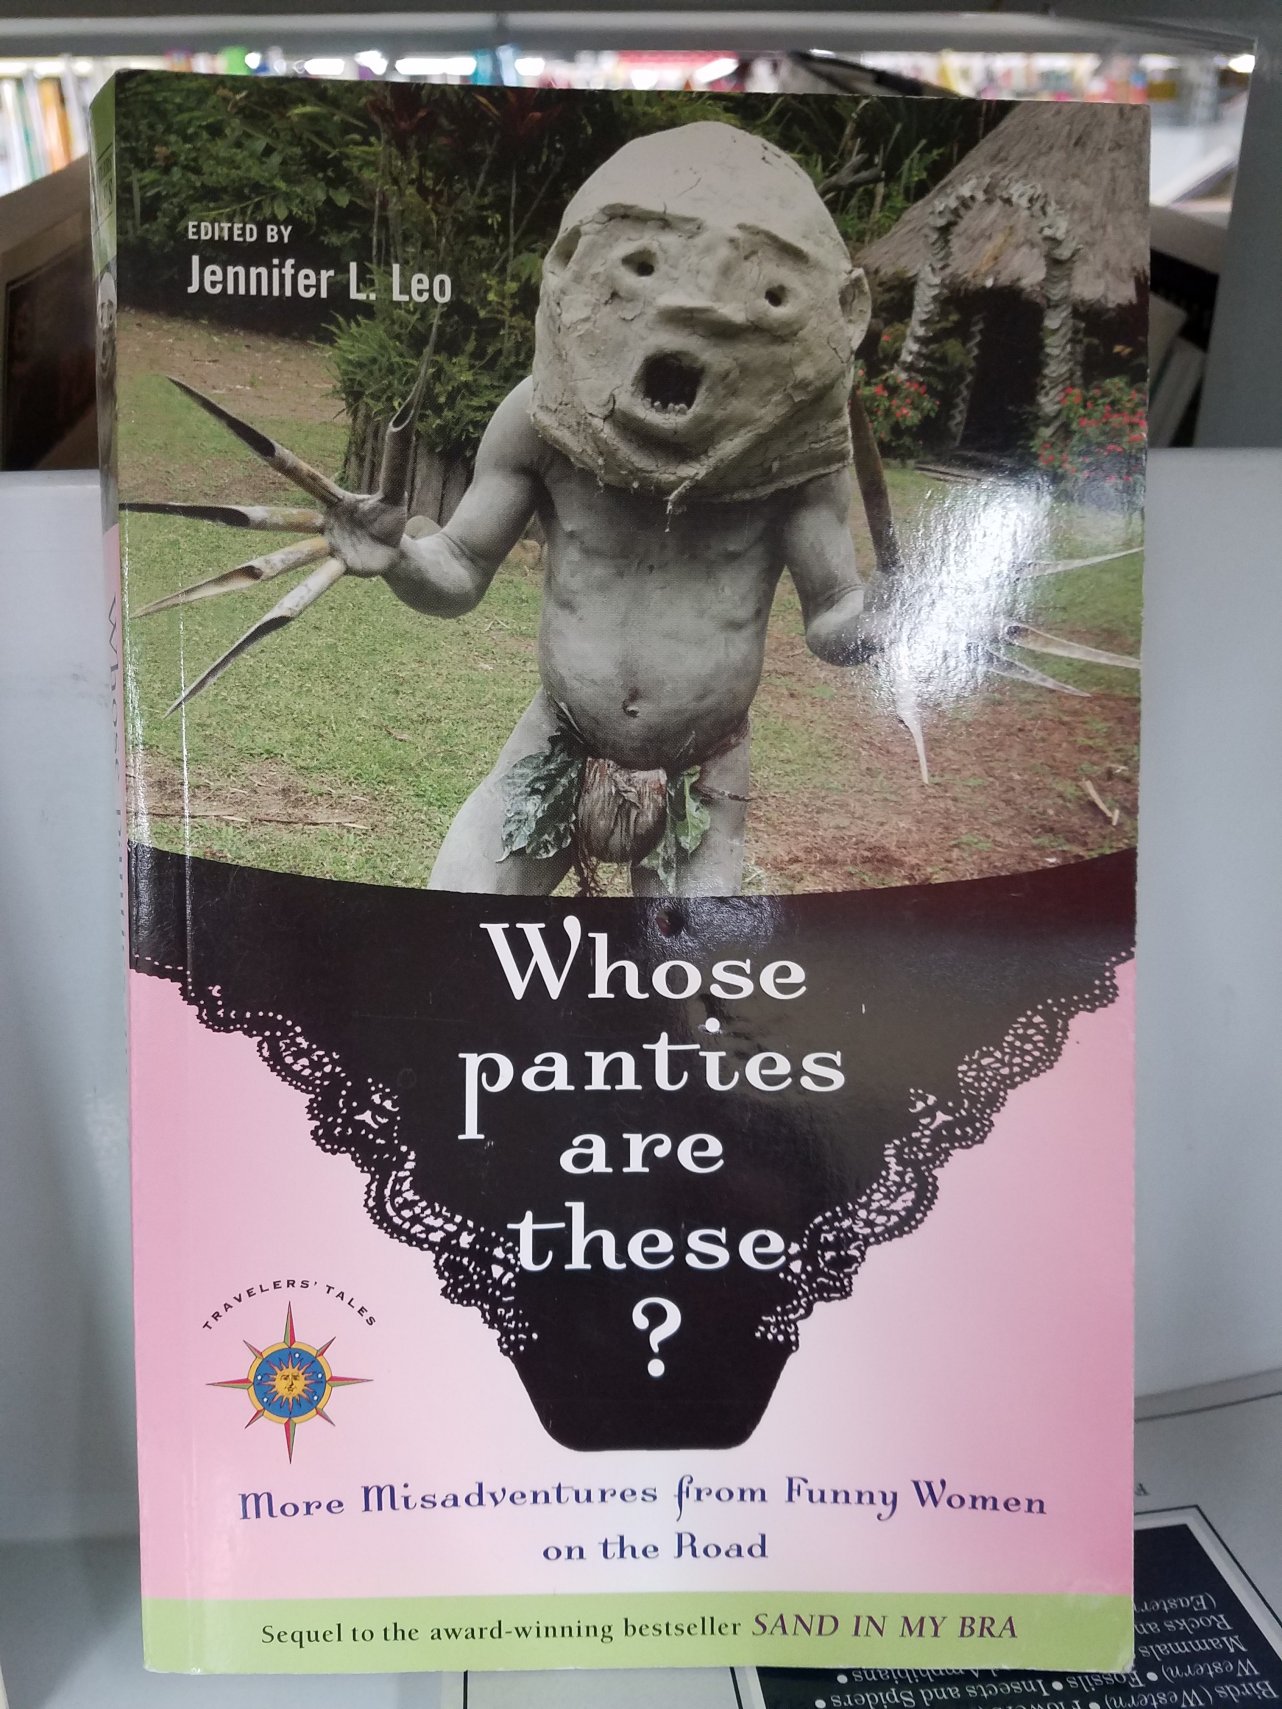 thrift store bra and panties funny quotes - Edited By Jennifer L. Leo Whose panties 1 are these Lelers T Tales Trave, more Misadventures from Funny Women on the Road Sequel to the awardwinning bestseller Sand In My Bra Easter Rocks an Mammals Western Foss